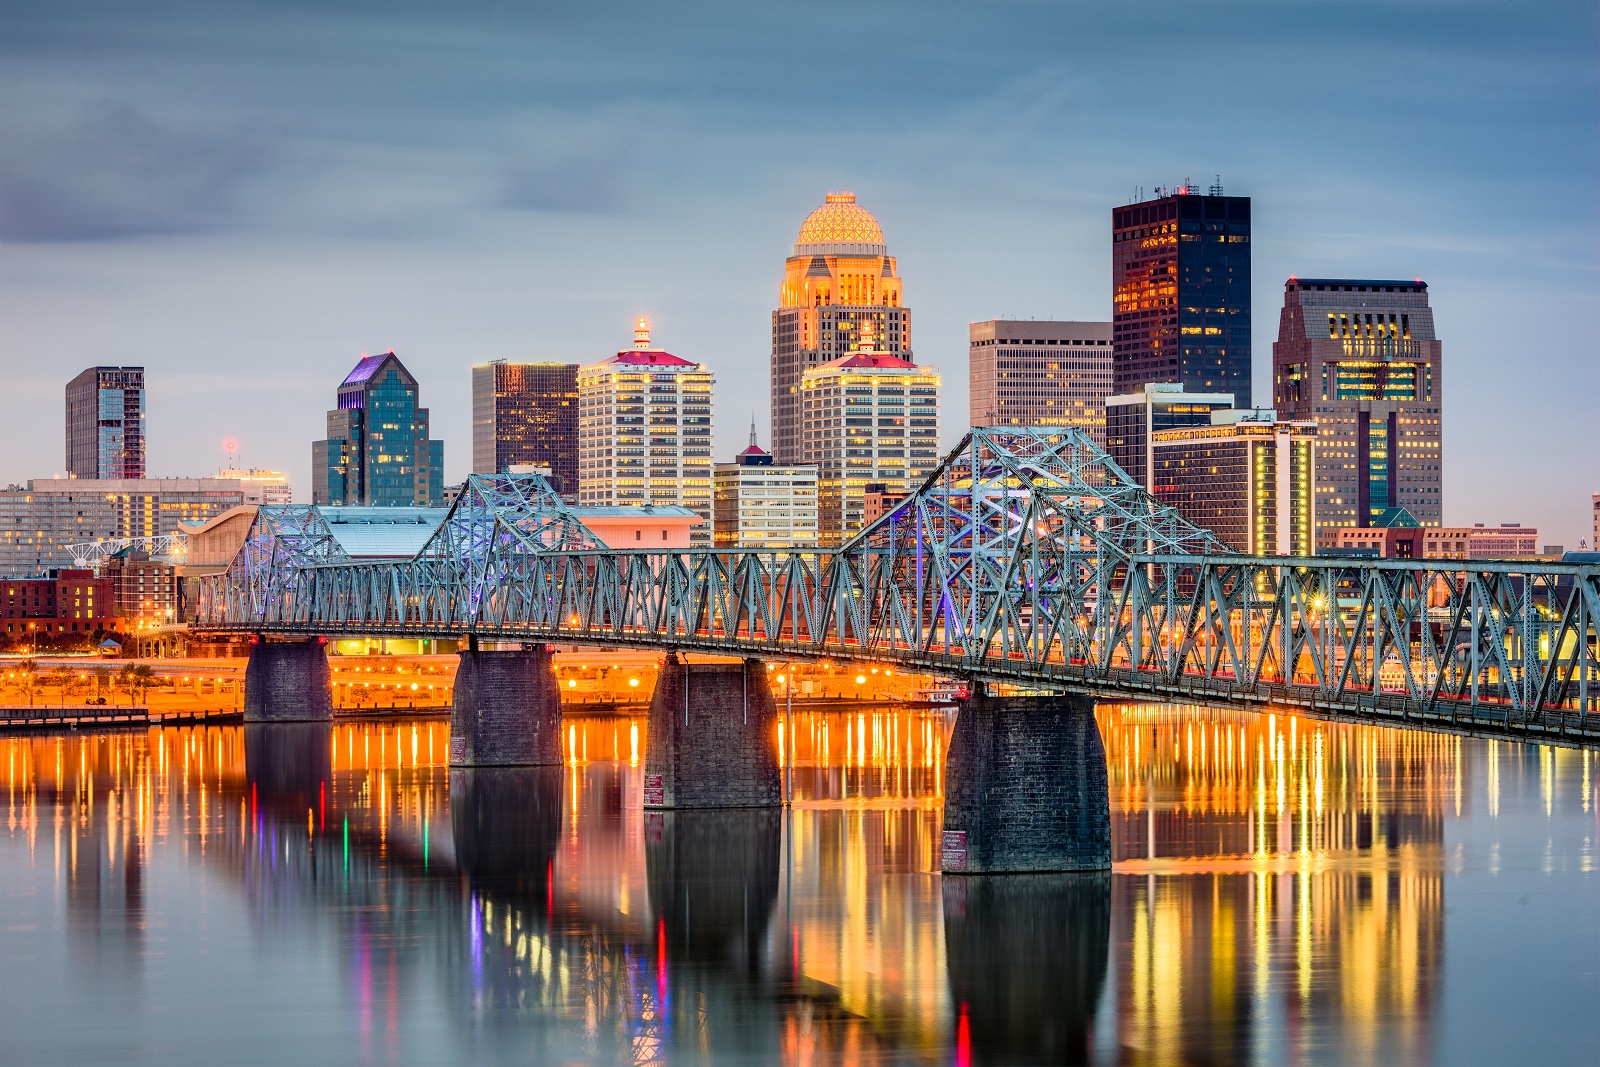 <p class="wp-caption-text">Image Credit: Shutterstock / Sean Pavone</p>  <p><span>Louisville’s roadways are well-designed for easy navigation, and the city maintains a consistently low level of traffic congestion.</span></p>